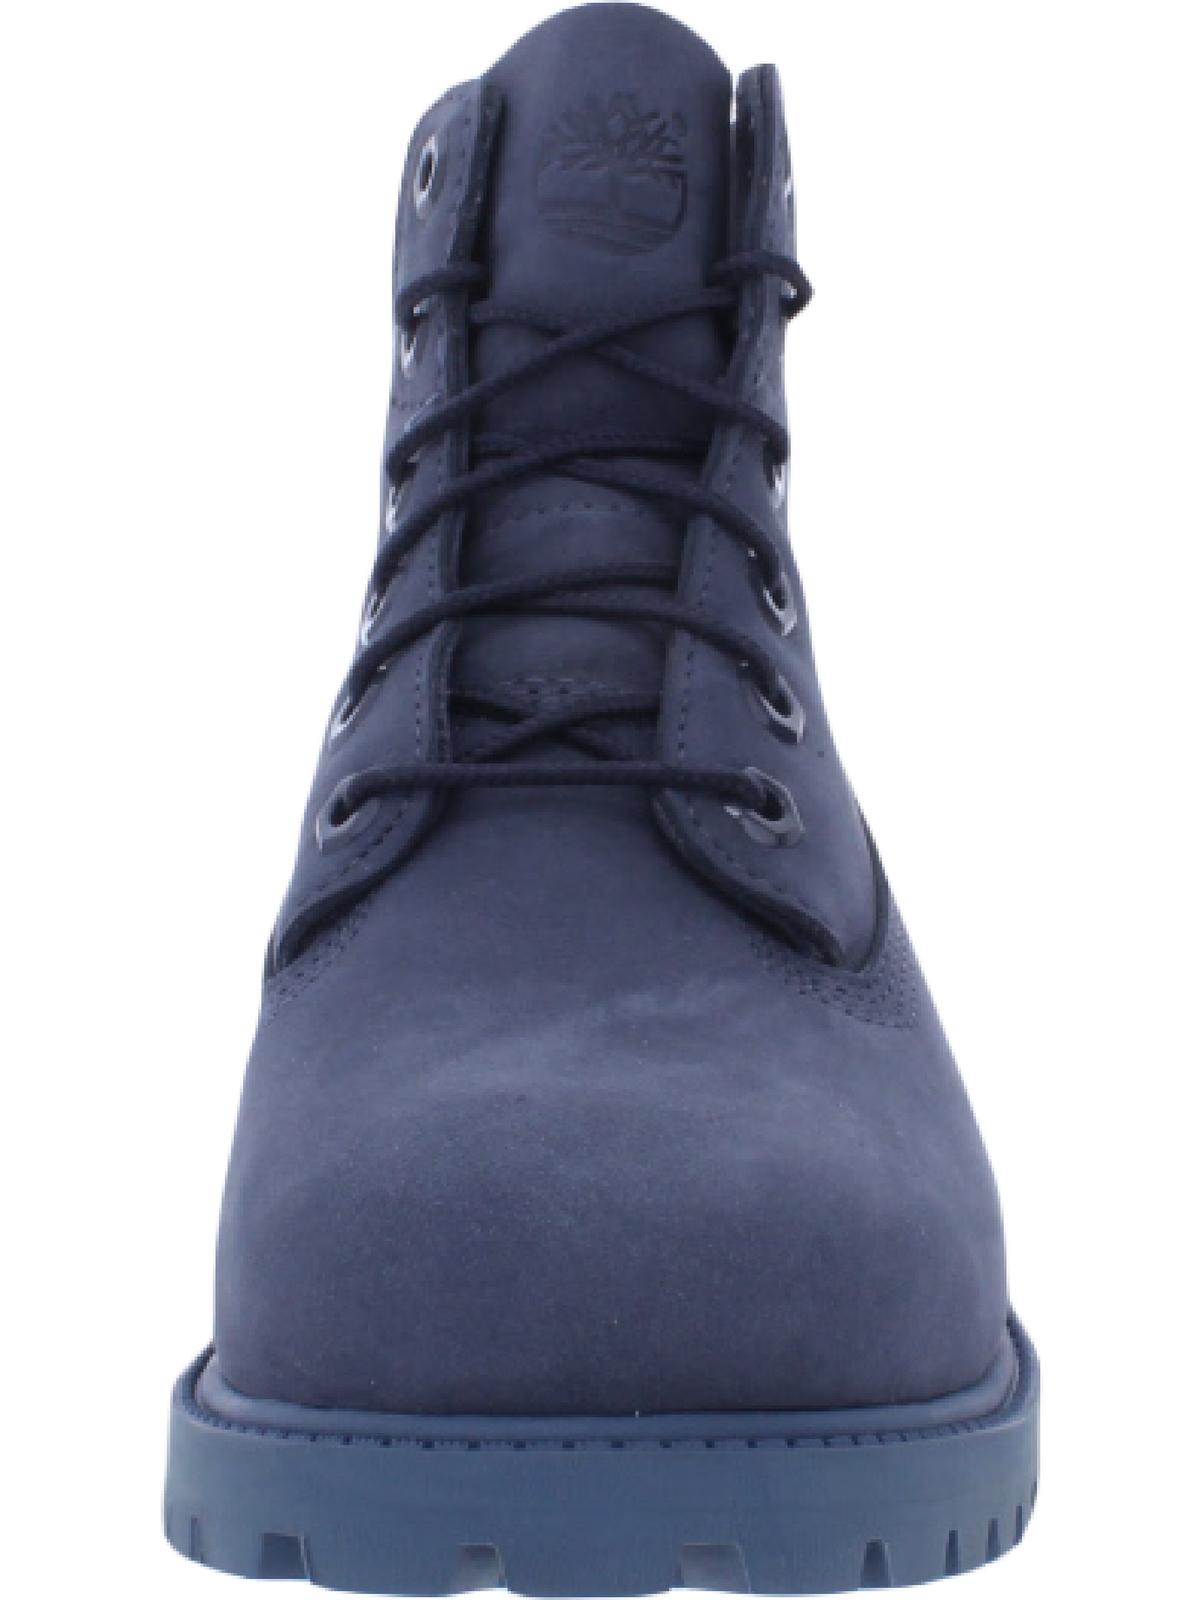 Timberland Boys Leather Lace Up Ankle Boots Blue 4 Medium (D) Big Kid - image 3 of 3